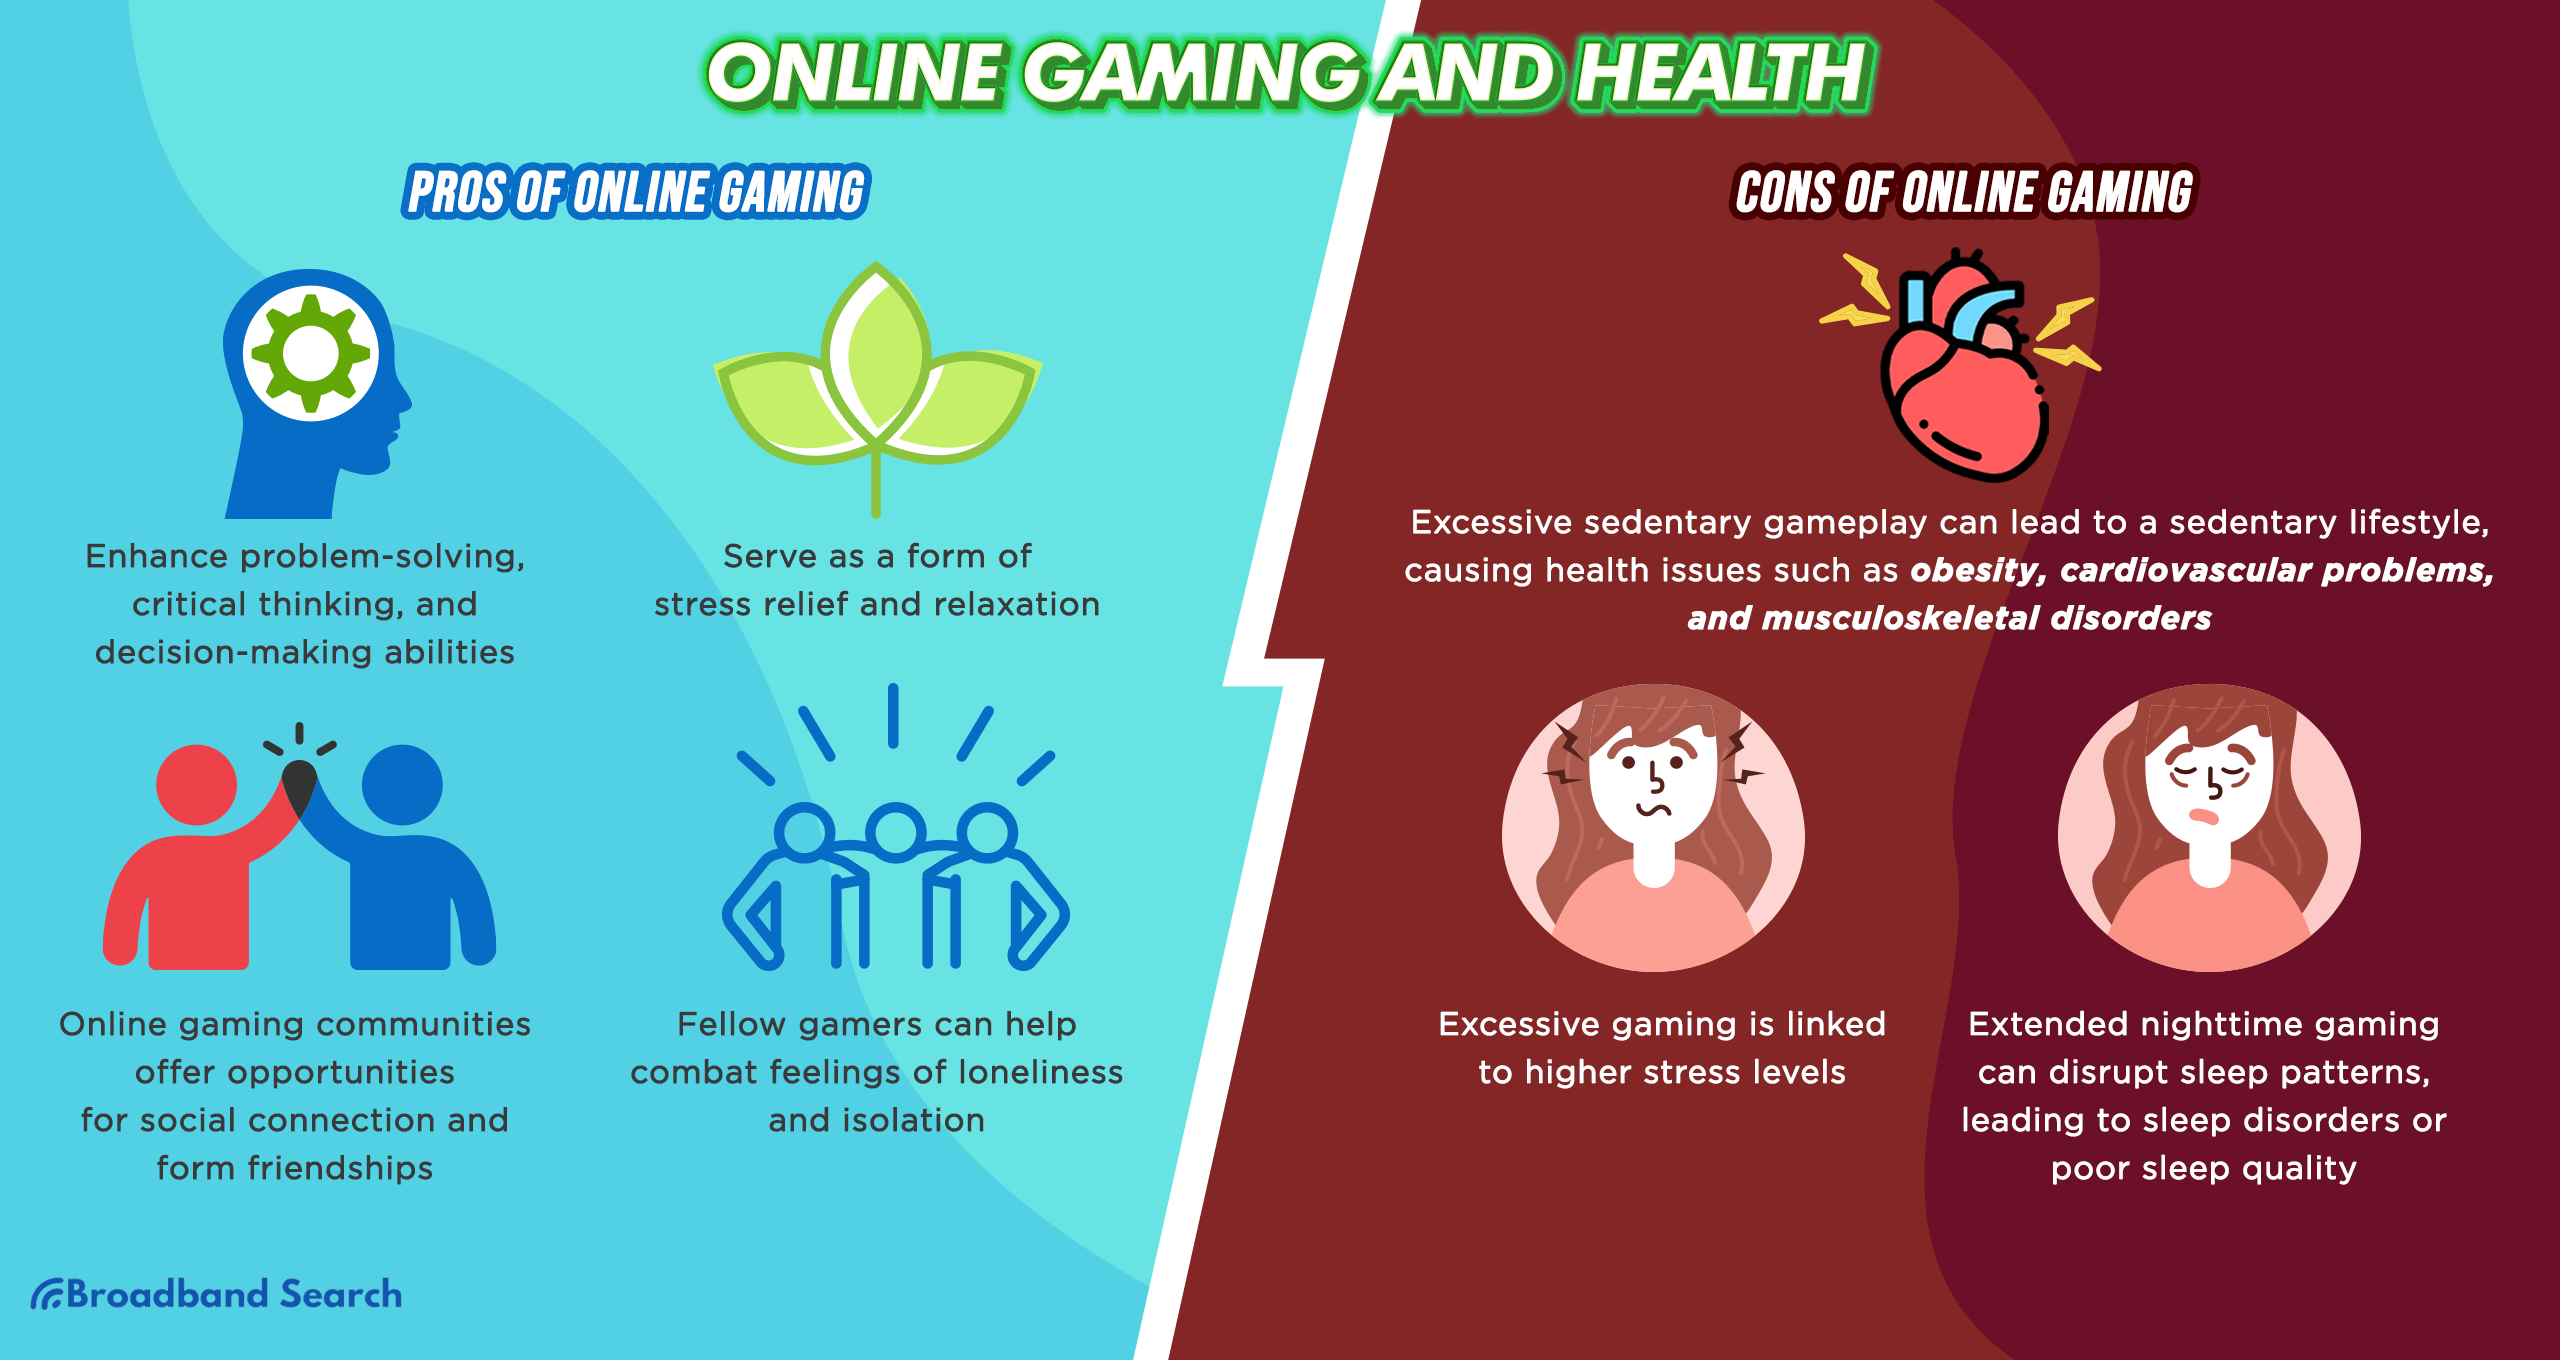 Online gaming and health infographic